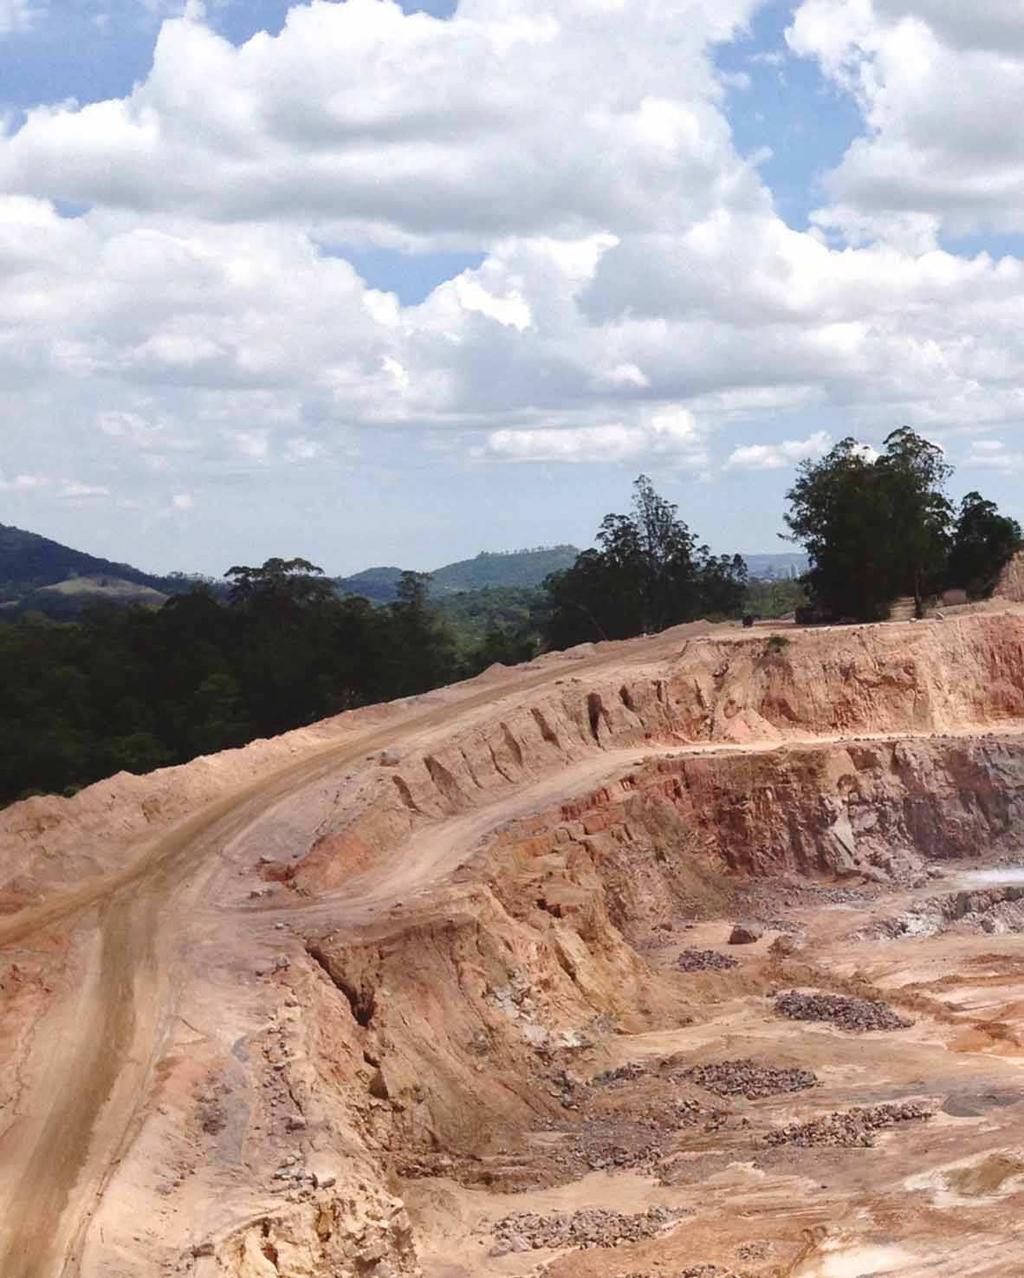 company developments COMPANY DEVELOPMENTS Minerali Industriali: FELDSPAR AND SILICA SAND PRODUCTION FOR THE GLASS MARKET IN CENTRAL AND SOUTH AMERICA Minerali Industriali is an independent mid-size